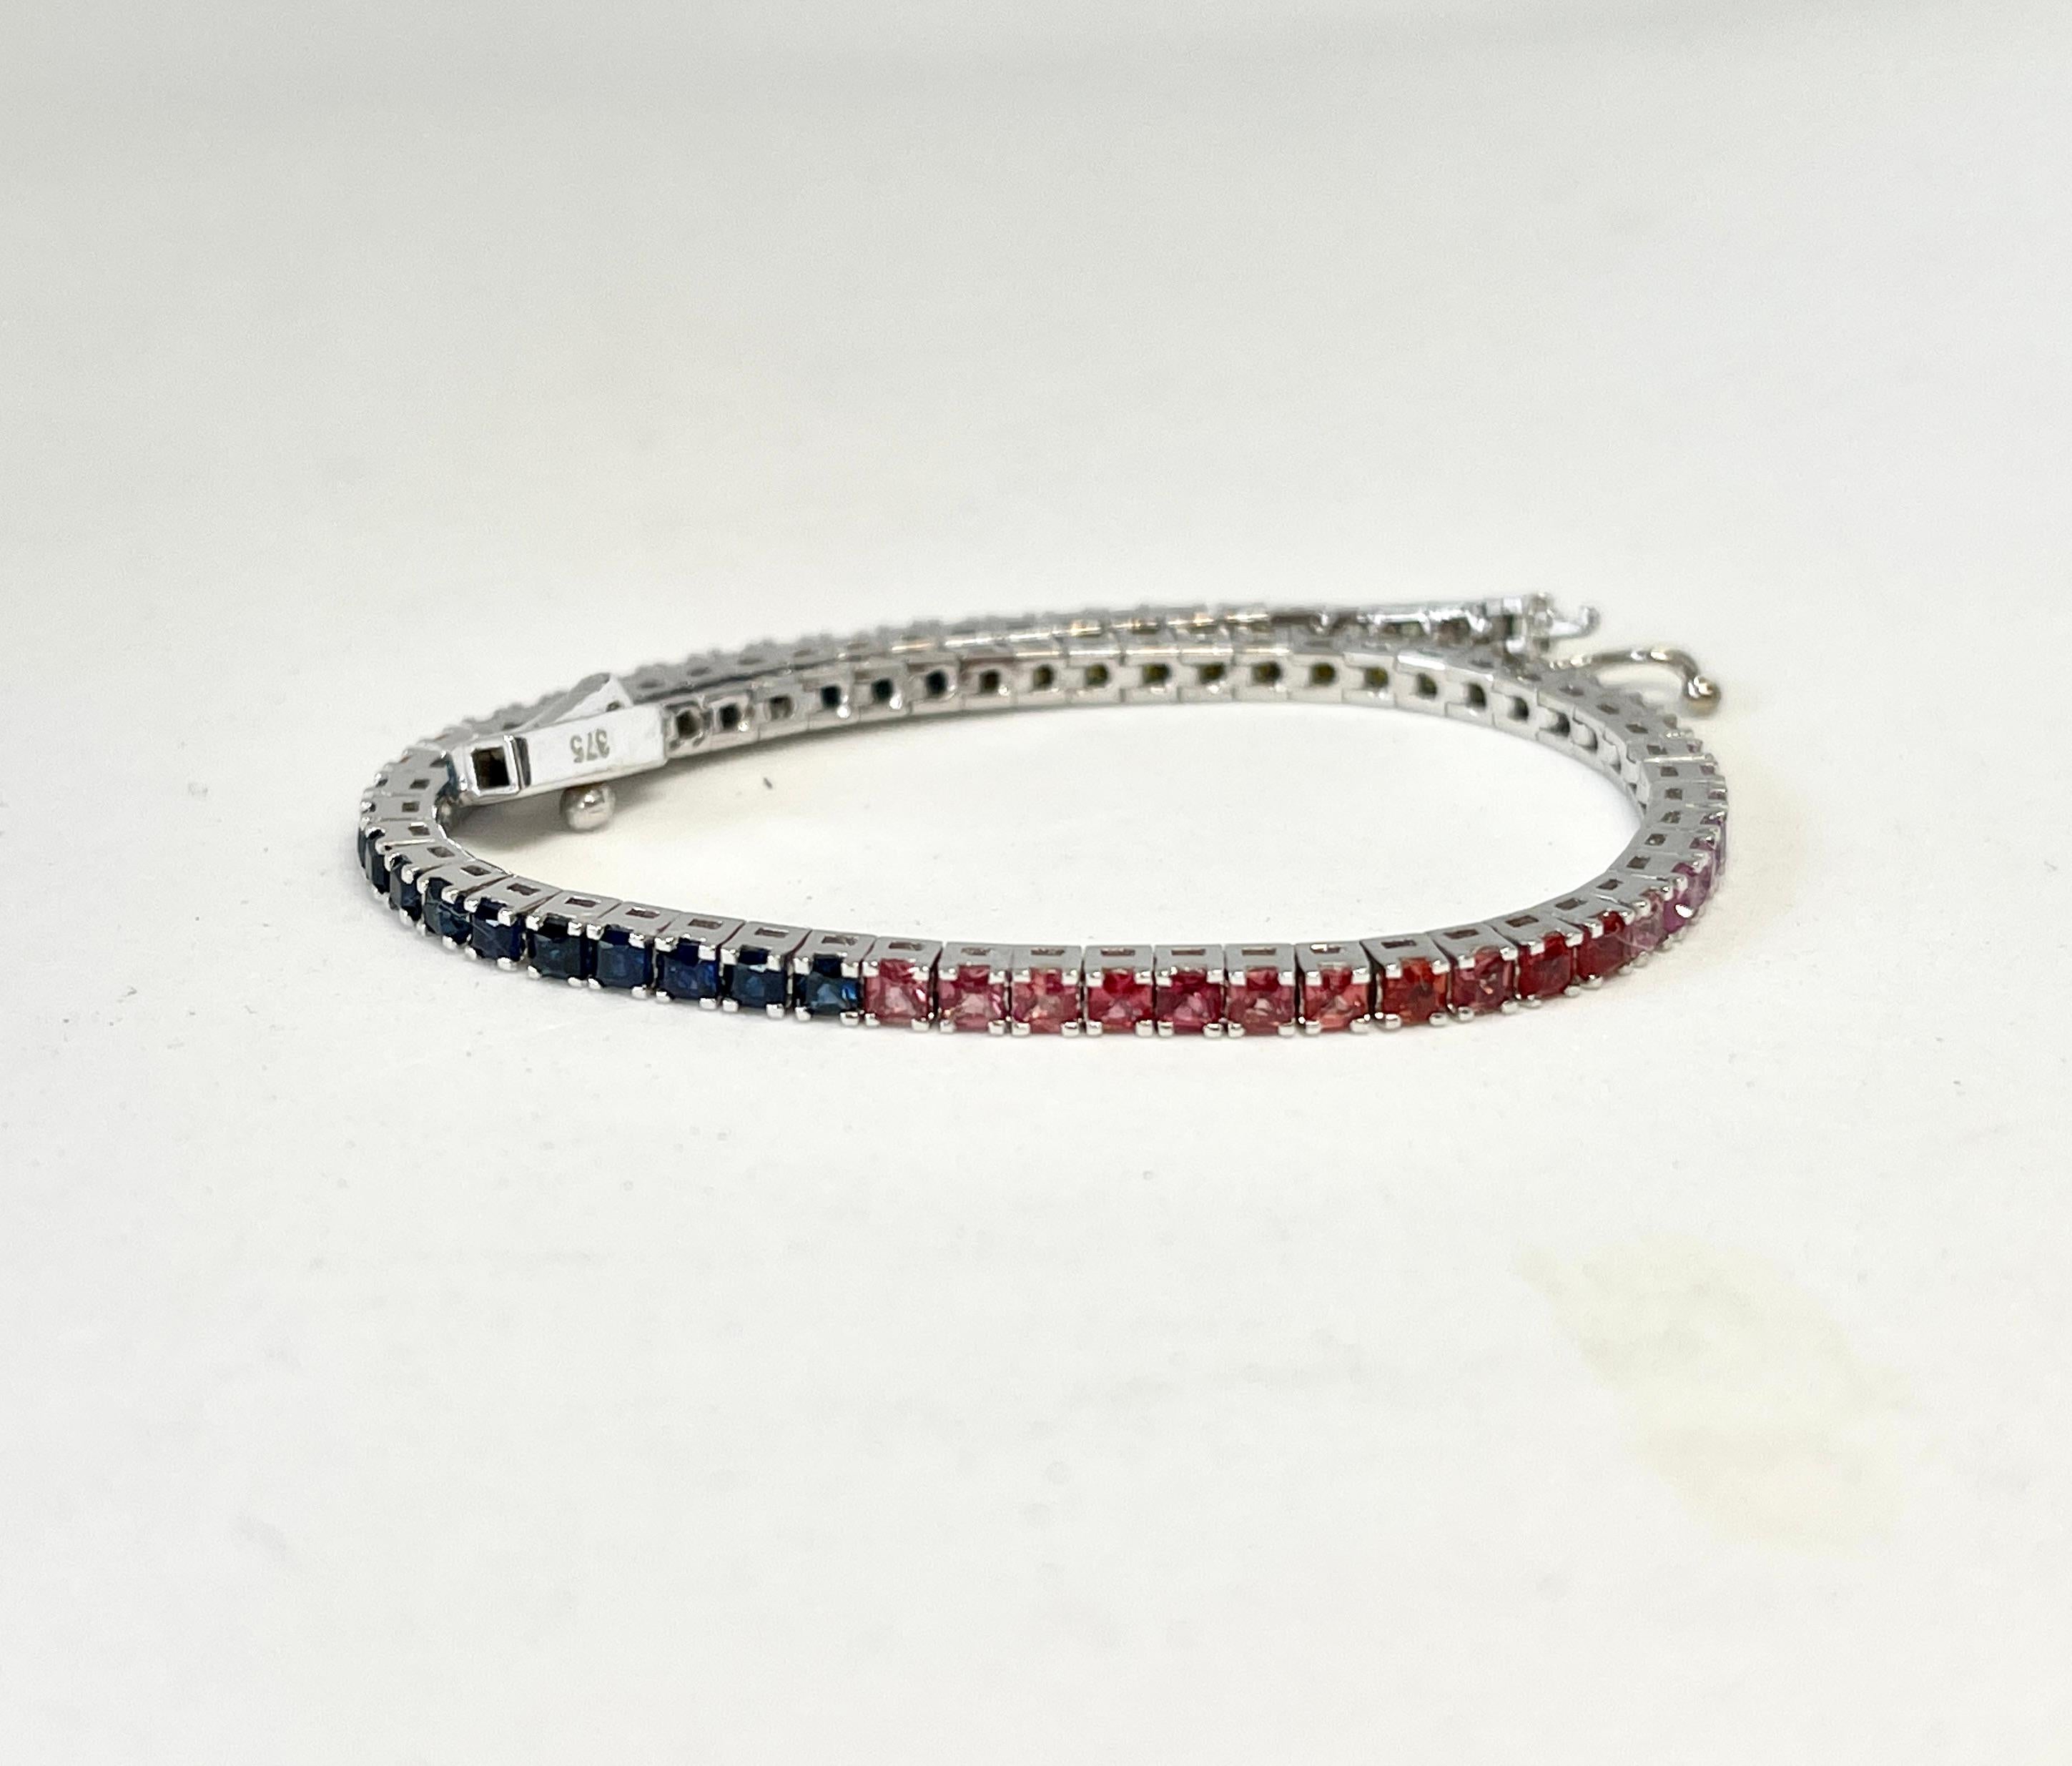 Wear a Rainbow on your Wrist!
This colourful, high quality bracelet features 4.63cts of varying coloured, Natural Sapphires set in 9ct white gold. 
The bracelet is good quality and well made.  
The stars of this piece are the multi-coloured,